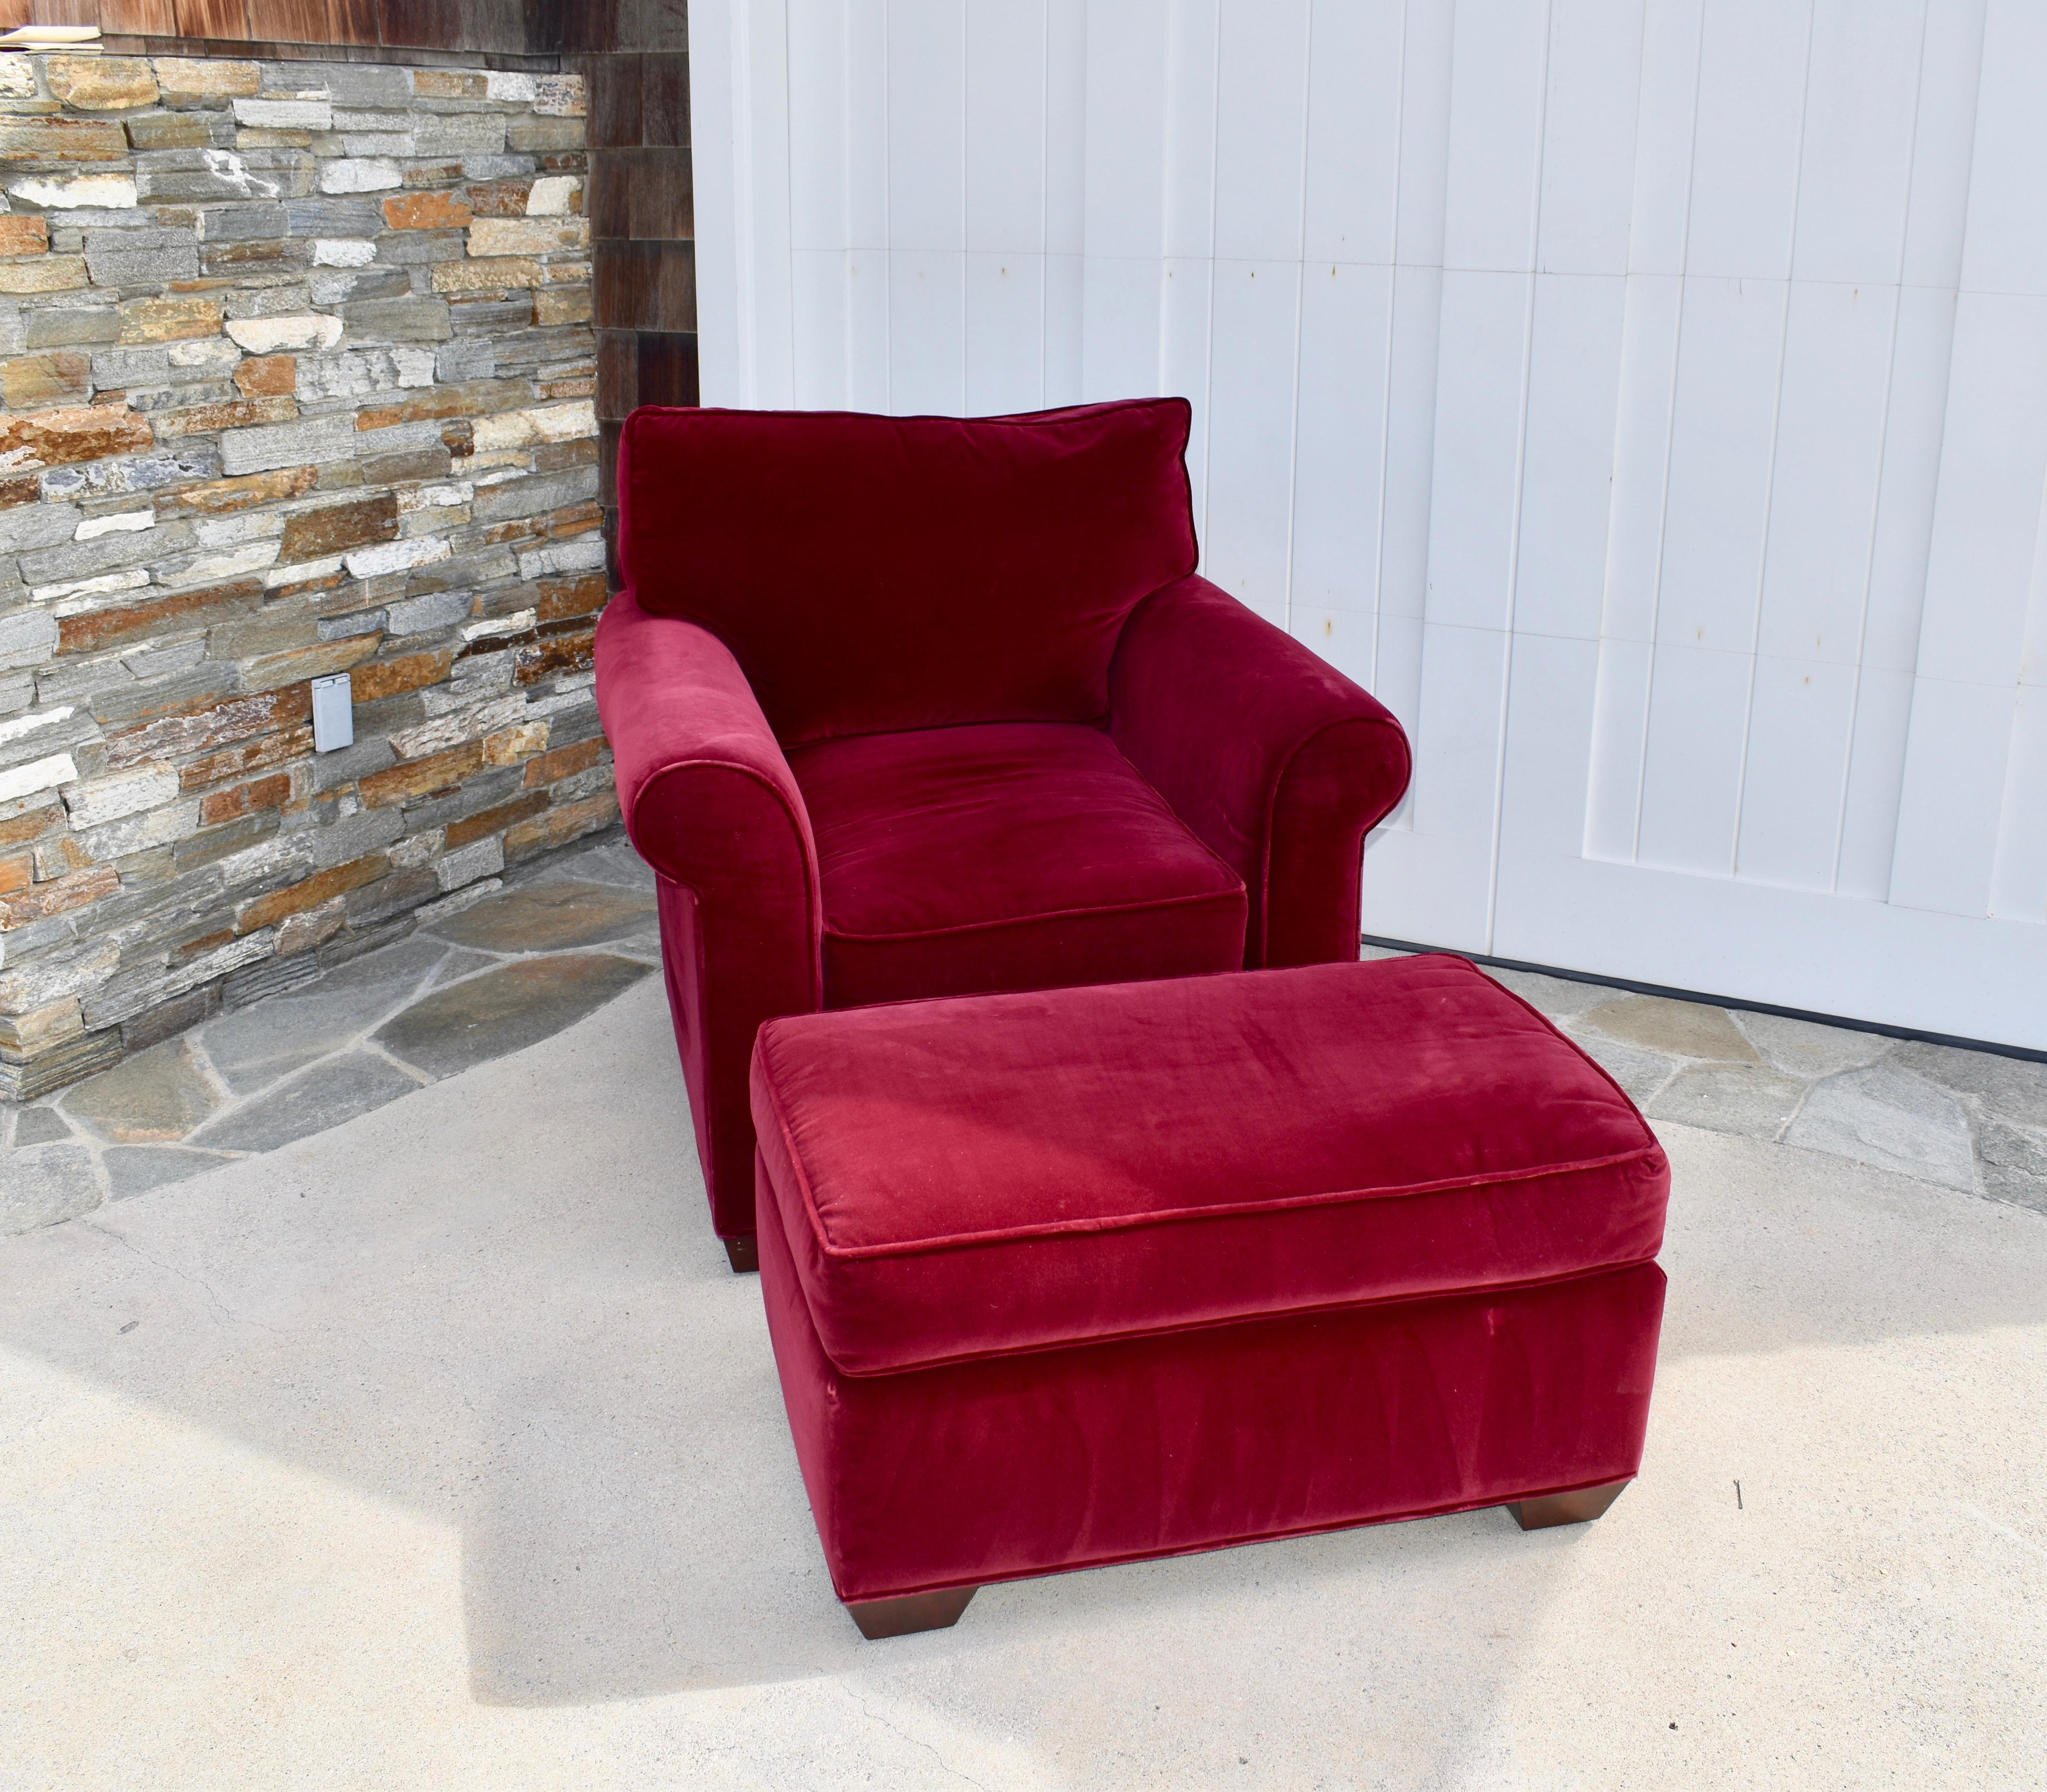 This decorator-designed red velvet club and ottoman brings comfort, class, and a touch of glam to your space - upholstered in soft, rich crimson red velvet with welting, button tufting, zippered over stuffed down filled cushion and short block